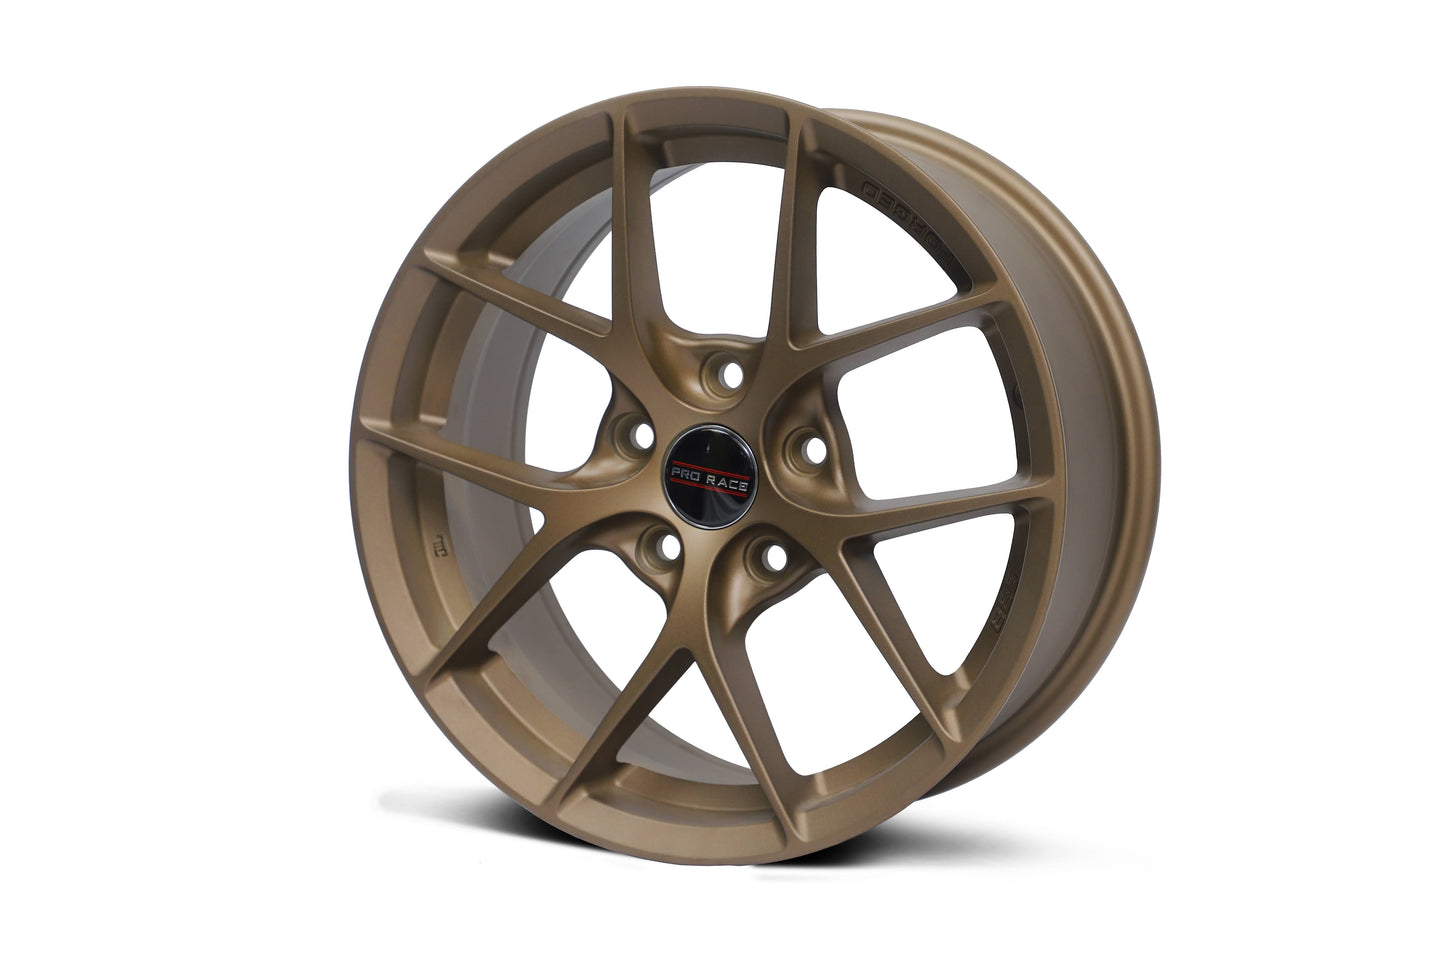 Pro Race 16 inch 5 hole Forged Copper